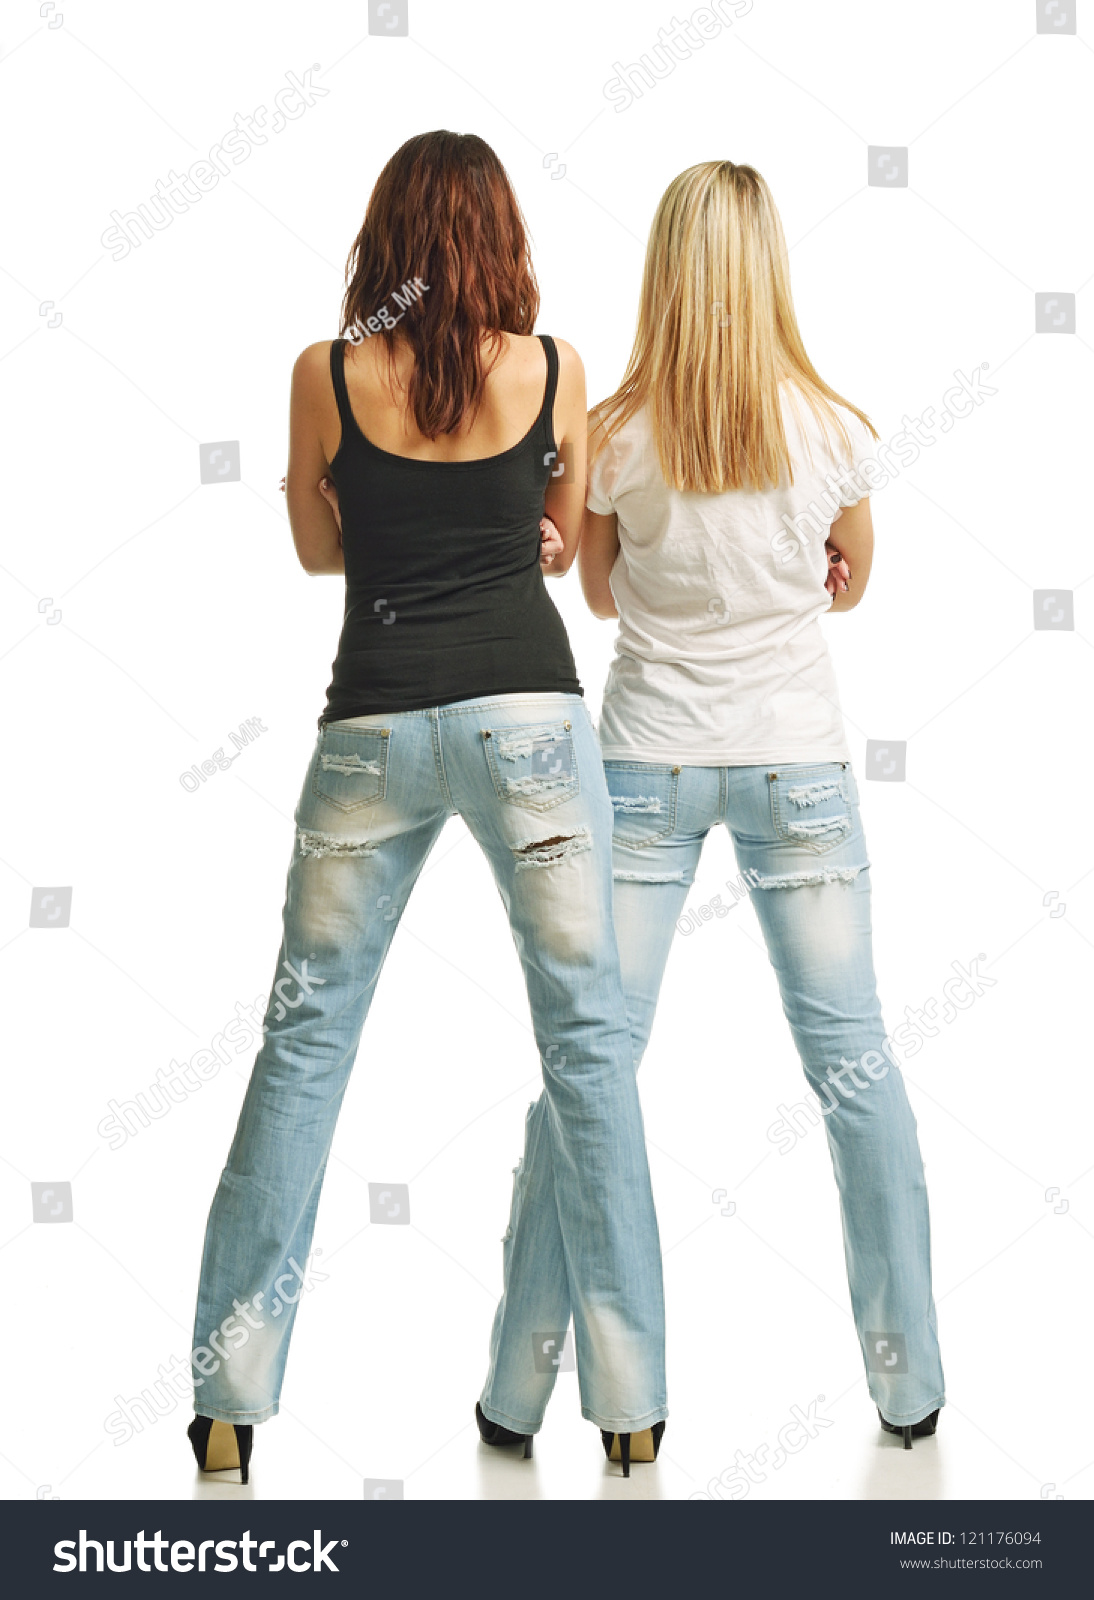 stock-photo-two-young-women-are-standing-back-their-legs-are-planted-apart-on-high-heels-they-are-wearing-121176094.jpg